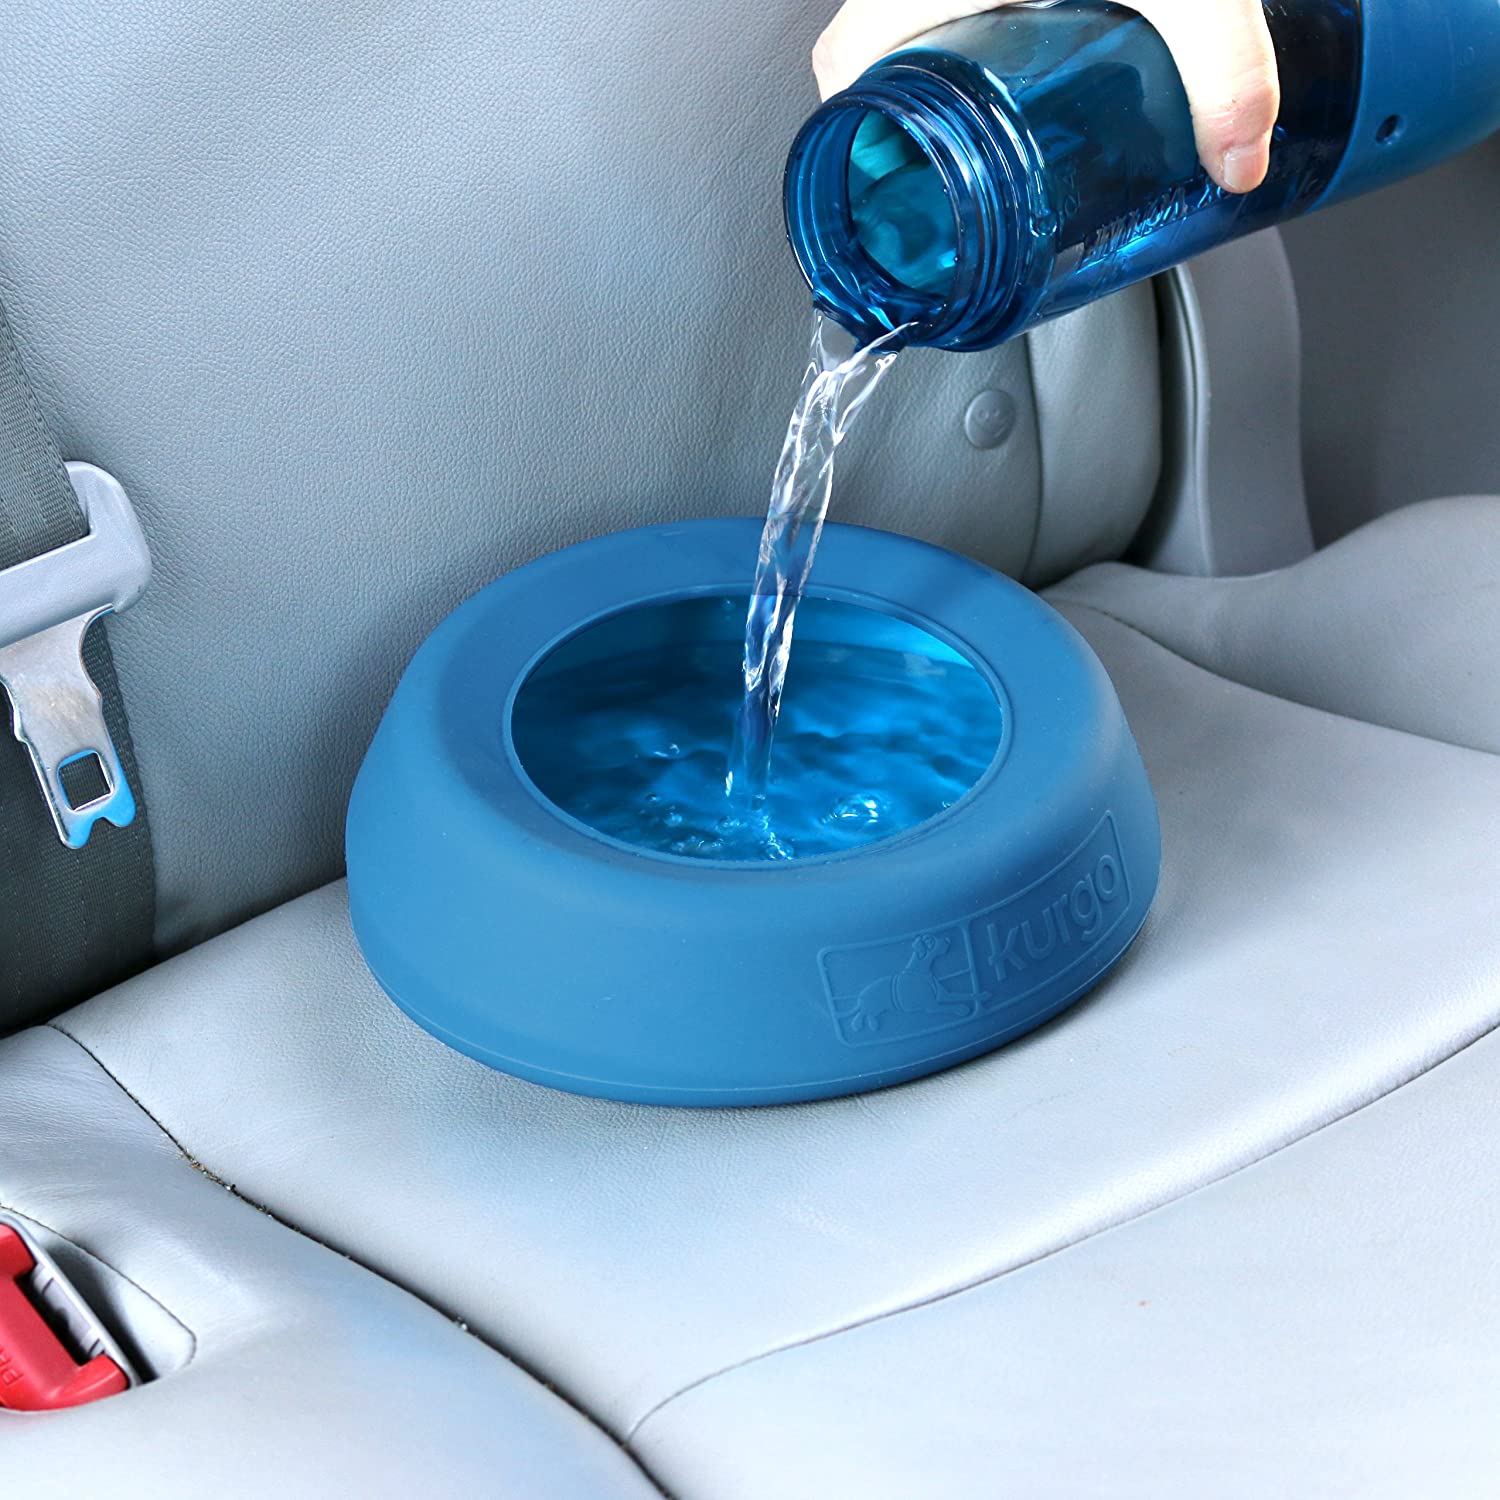 Water is being poured into a no-spill travel dog bowl which is on the backseat of a car.